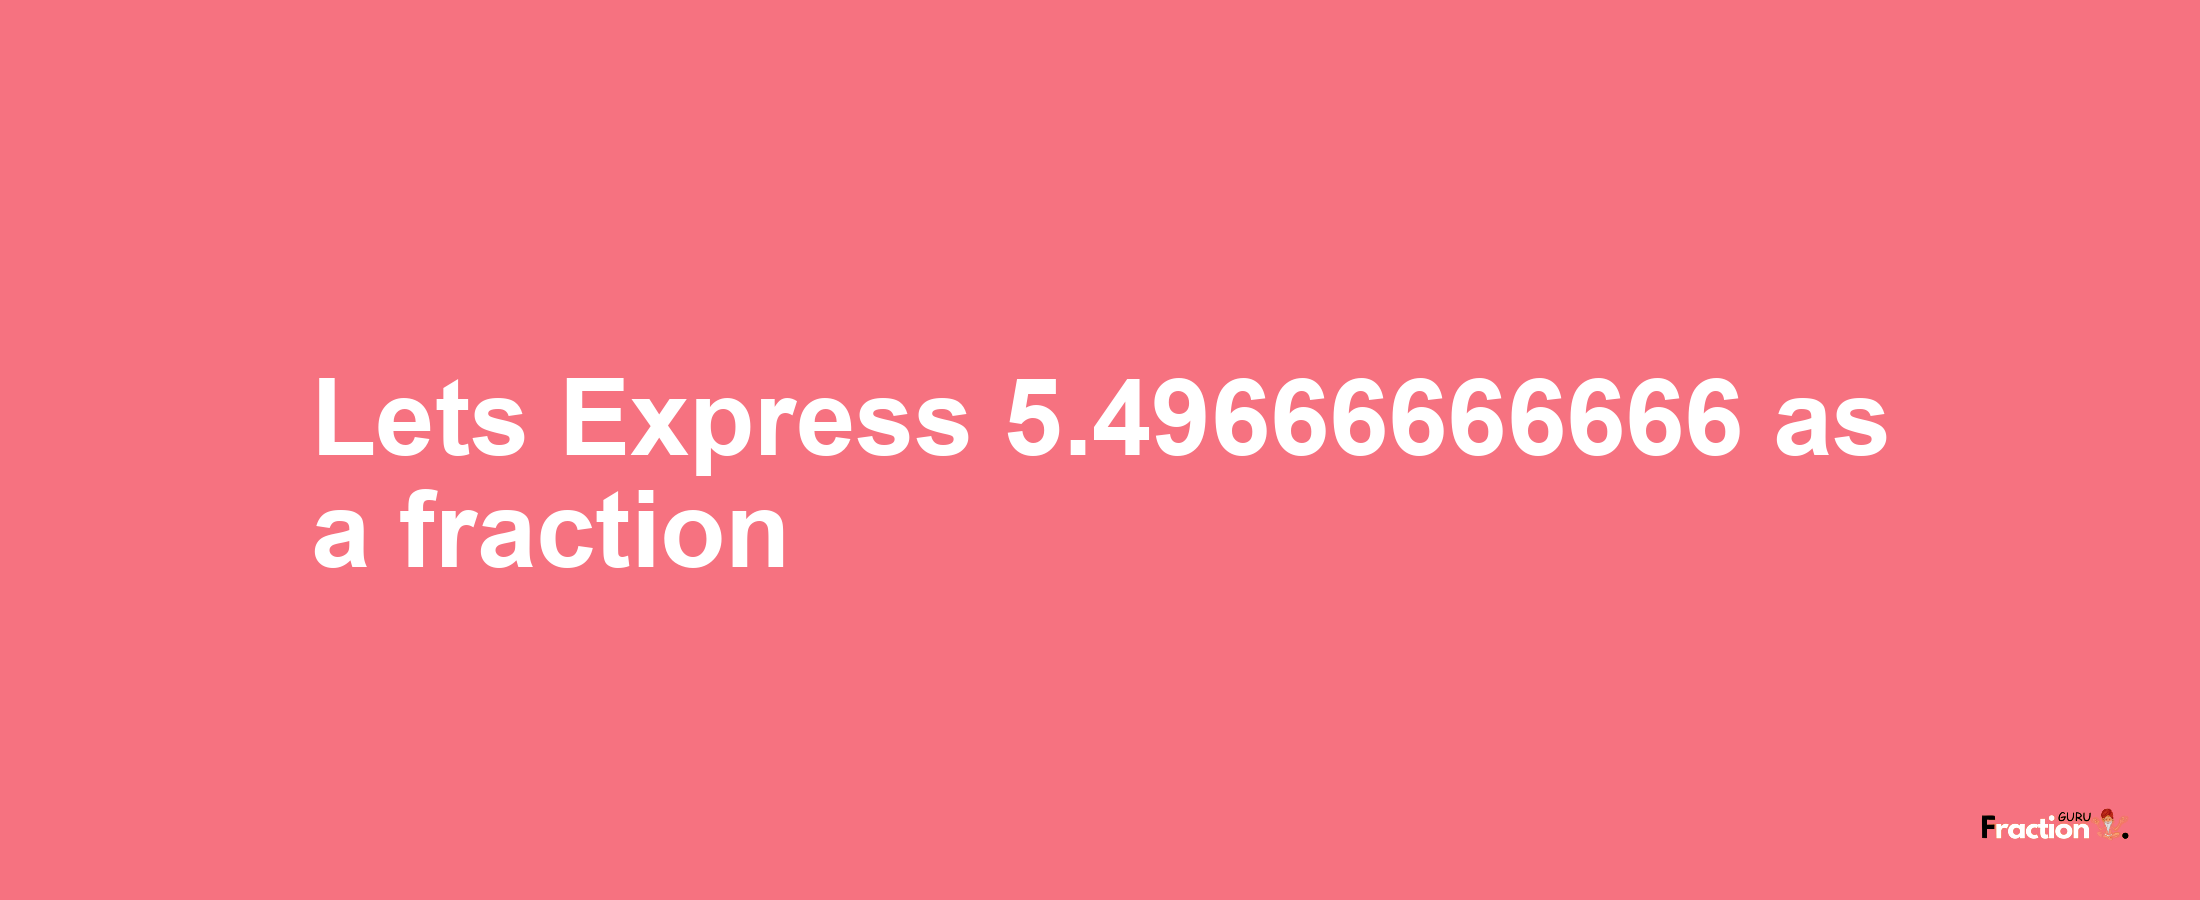 Lets Express 5.49666666666 as afraction